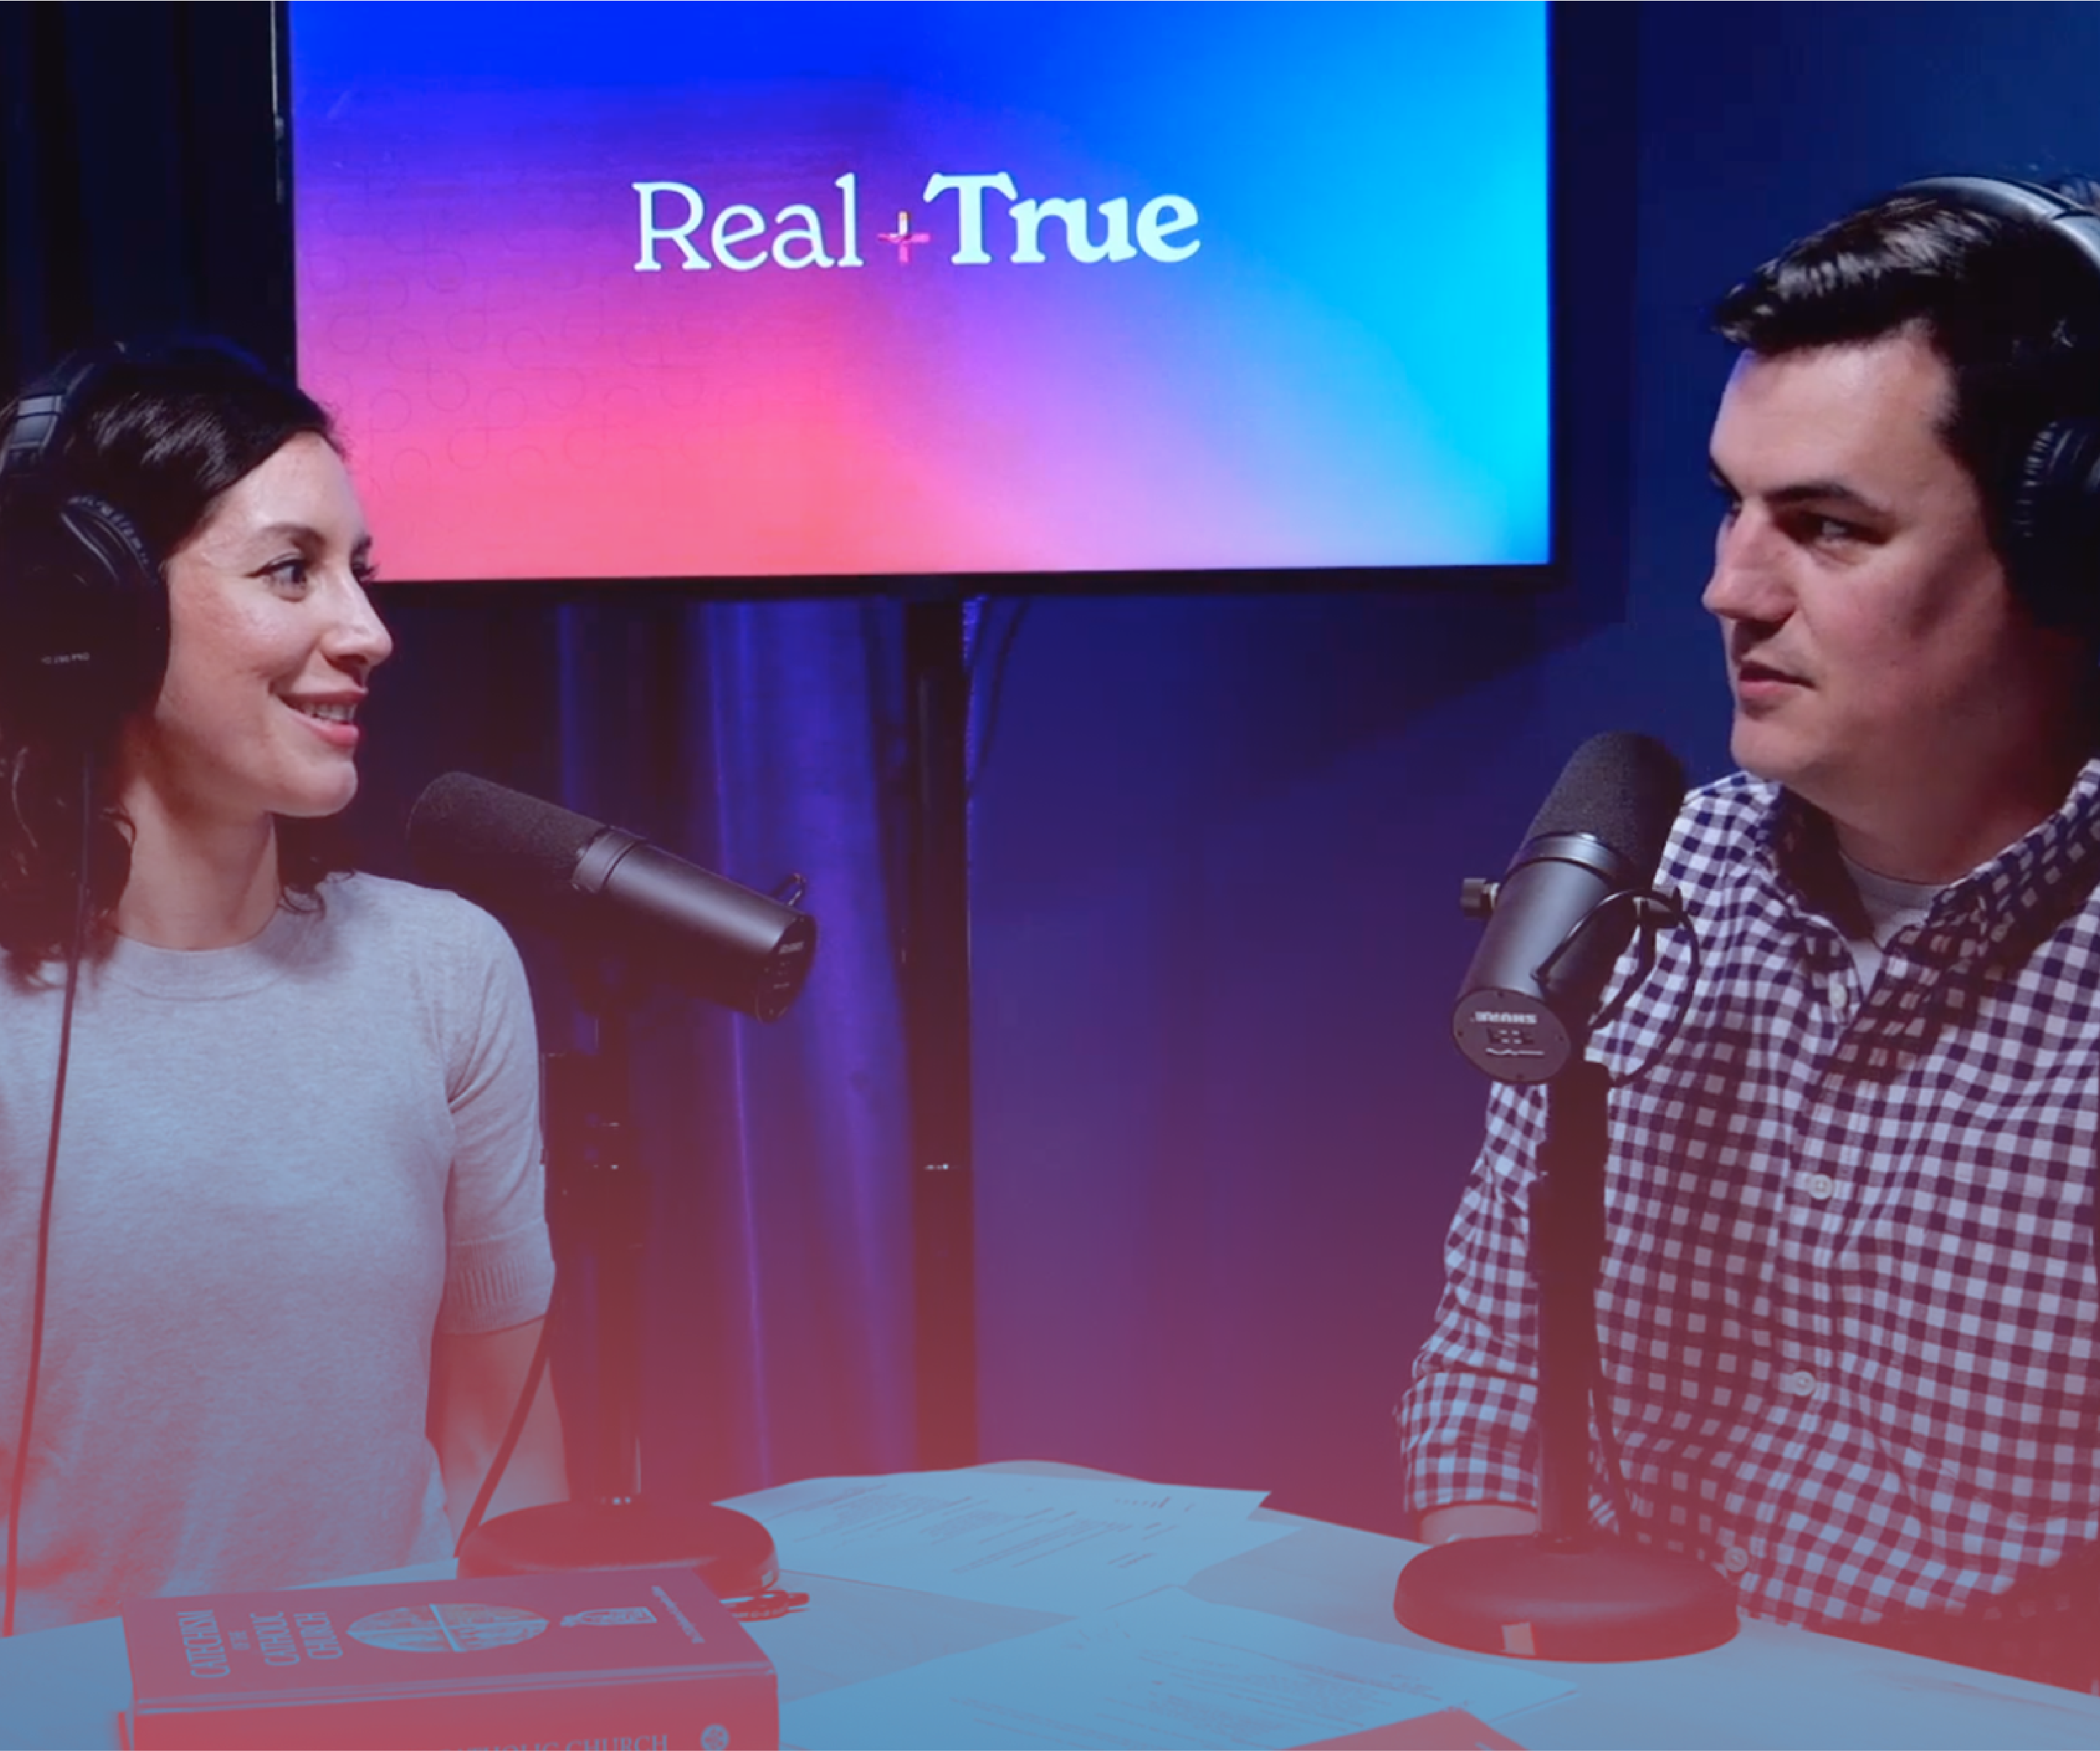 Real + True Podcast on the Catechism of the Catholic Church